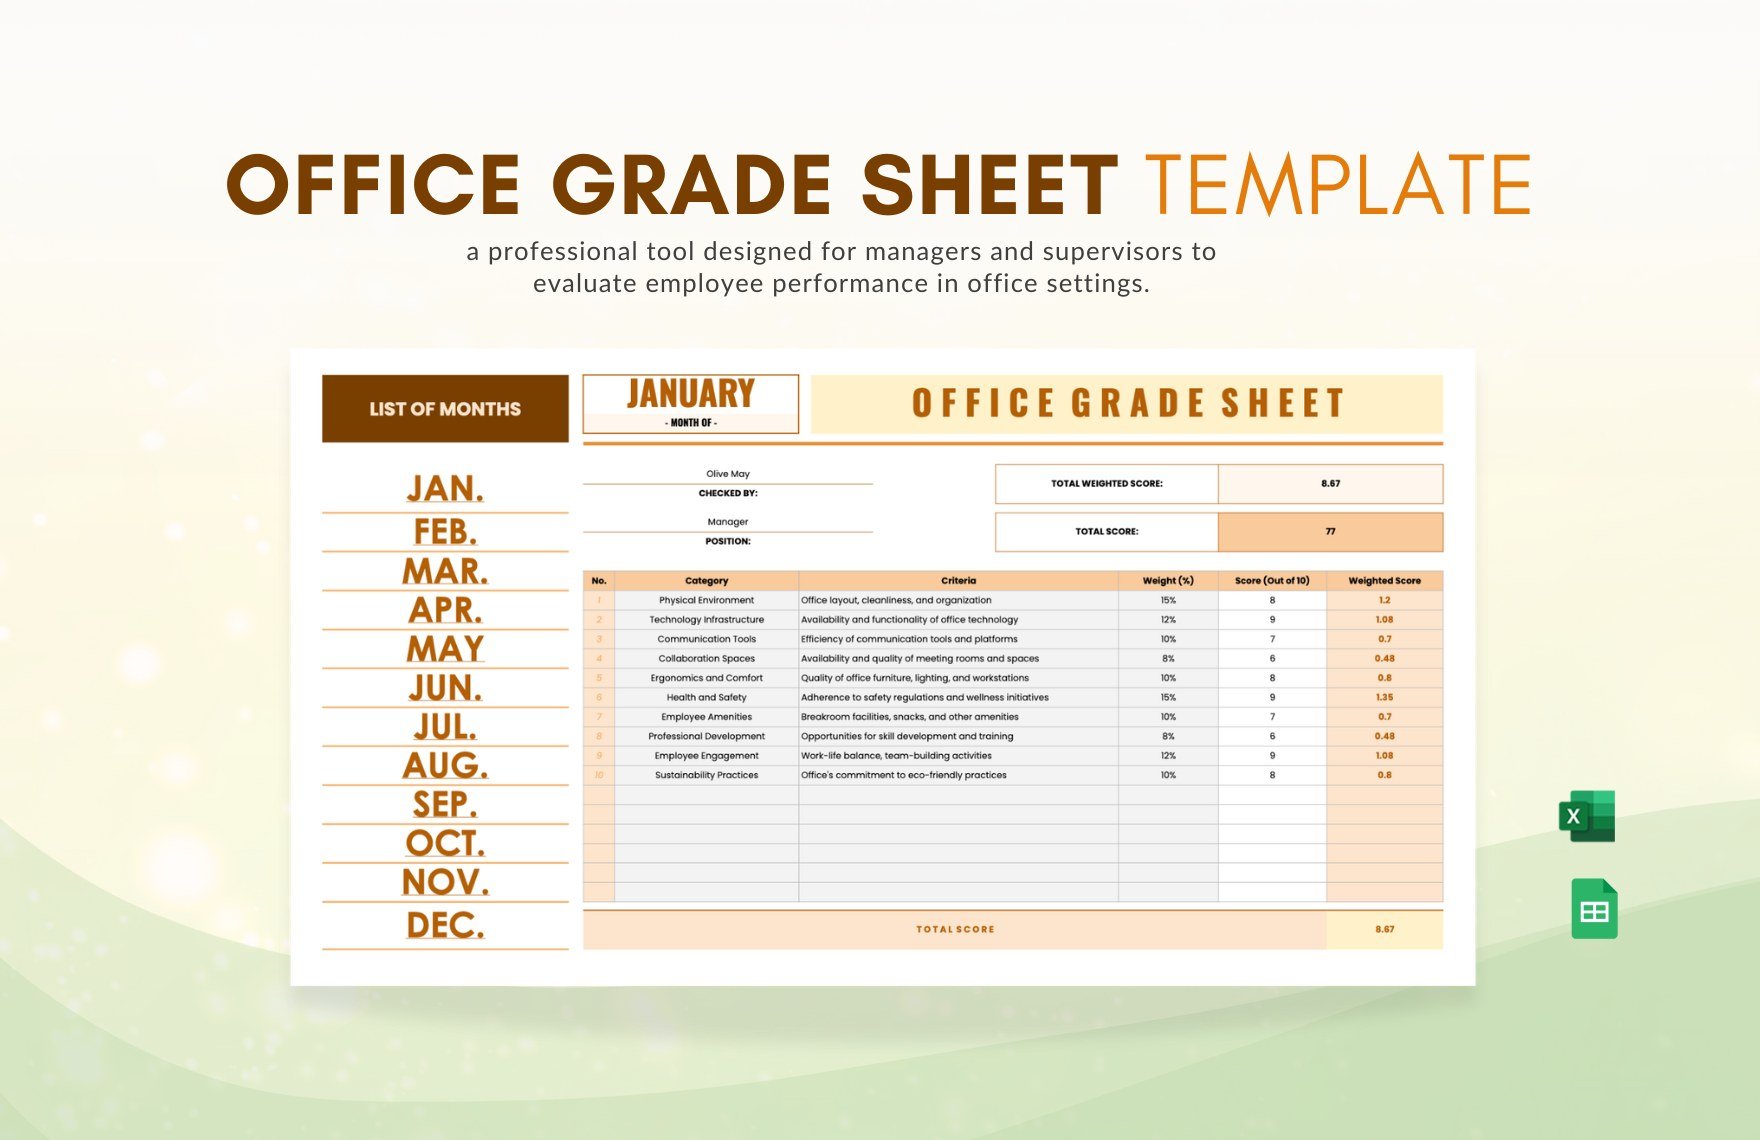 Office Grade Sheet Template in Excel, Google Sheets